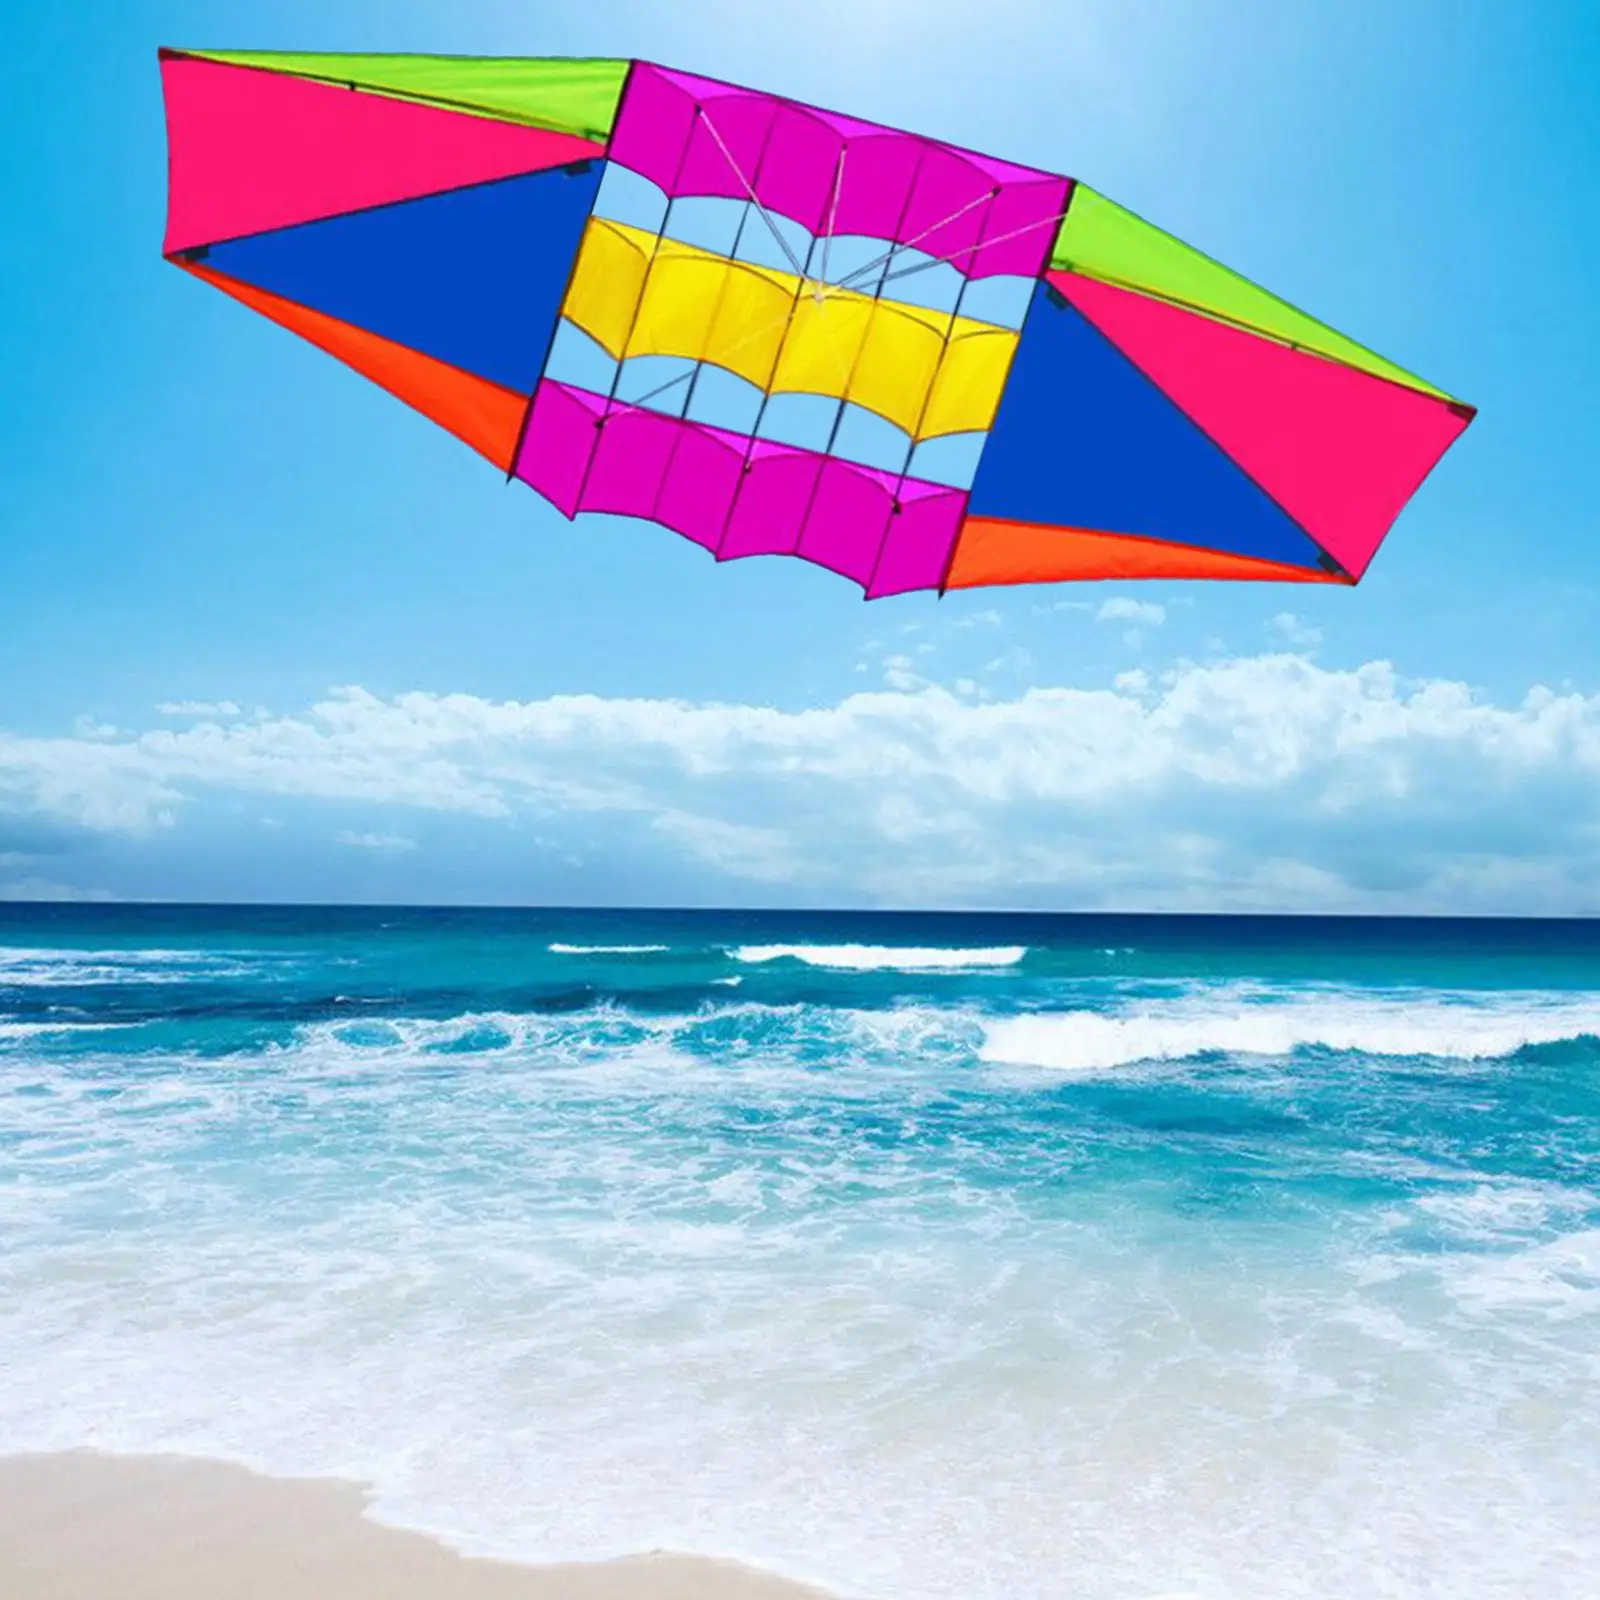 Multicolor  Outdoor Games Activities Leisure Easy to Fly Stereoscopic for Beach Beginner Adults Children Teenagers